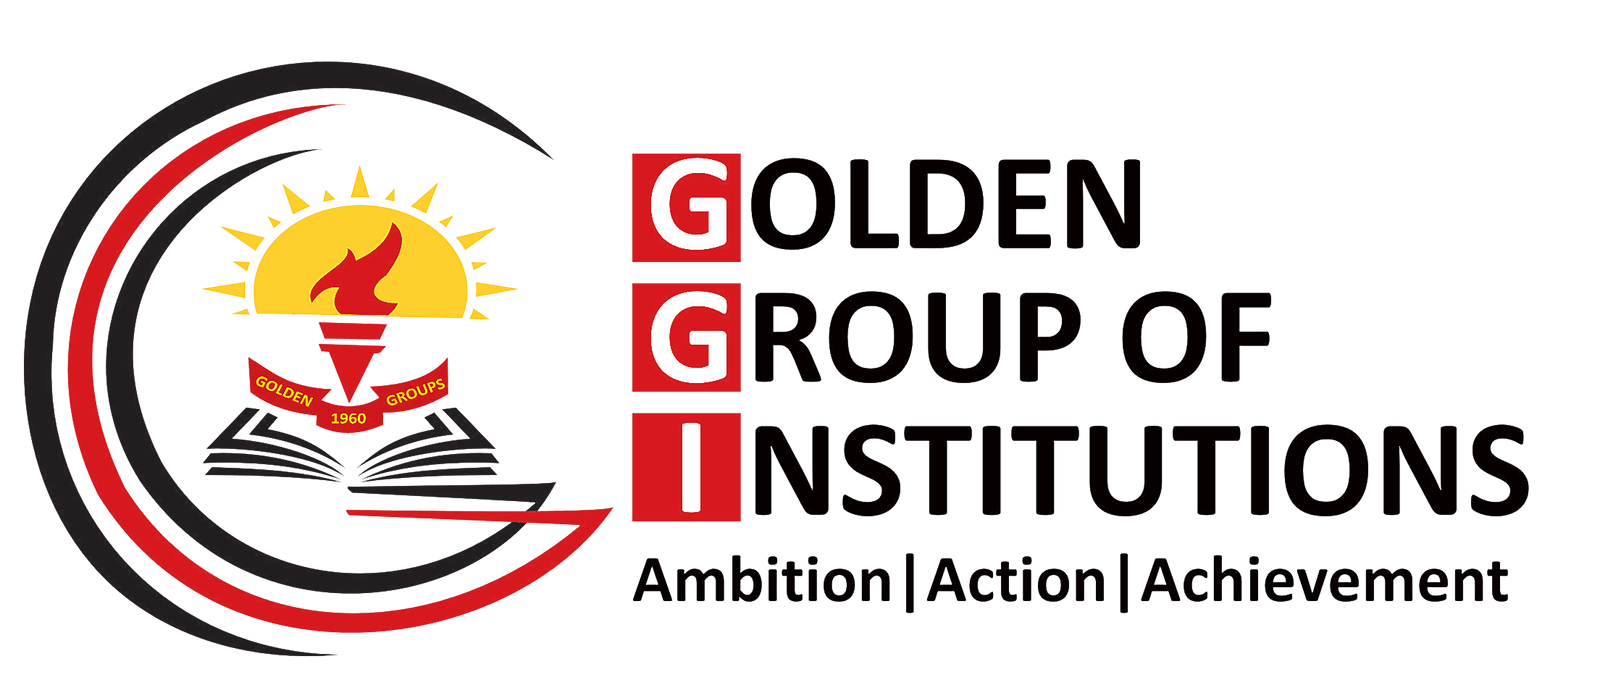 Golden Group Of Institution